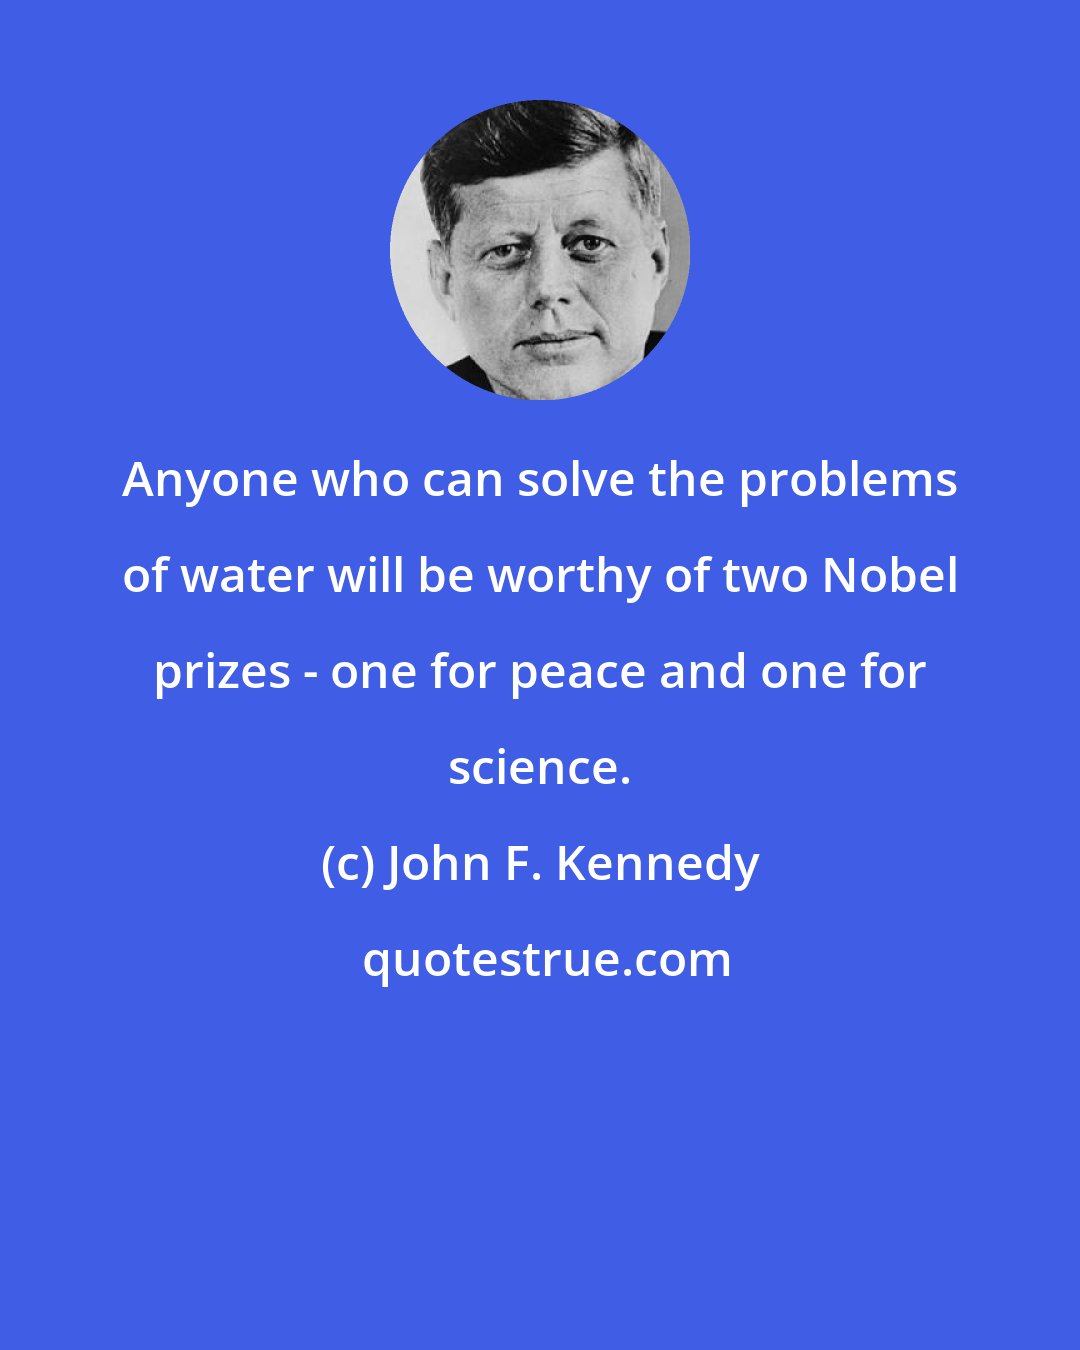 John F. Kennedy: Anyone who can solve the problems of water will be worthy of two Nobel prizes - one for peace and one for science.